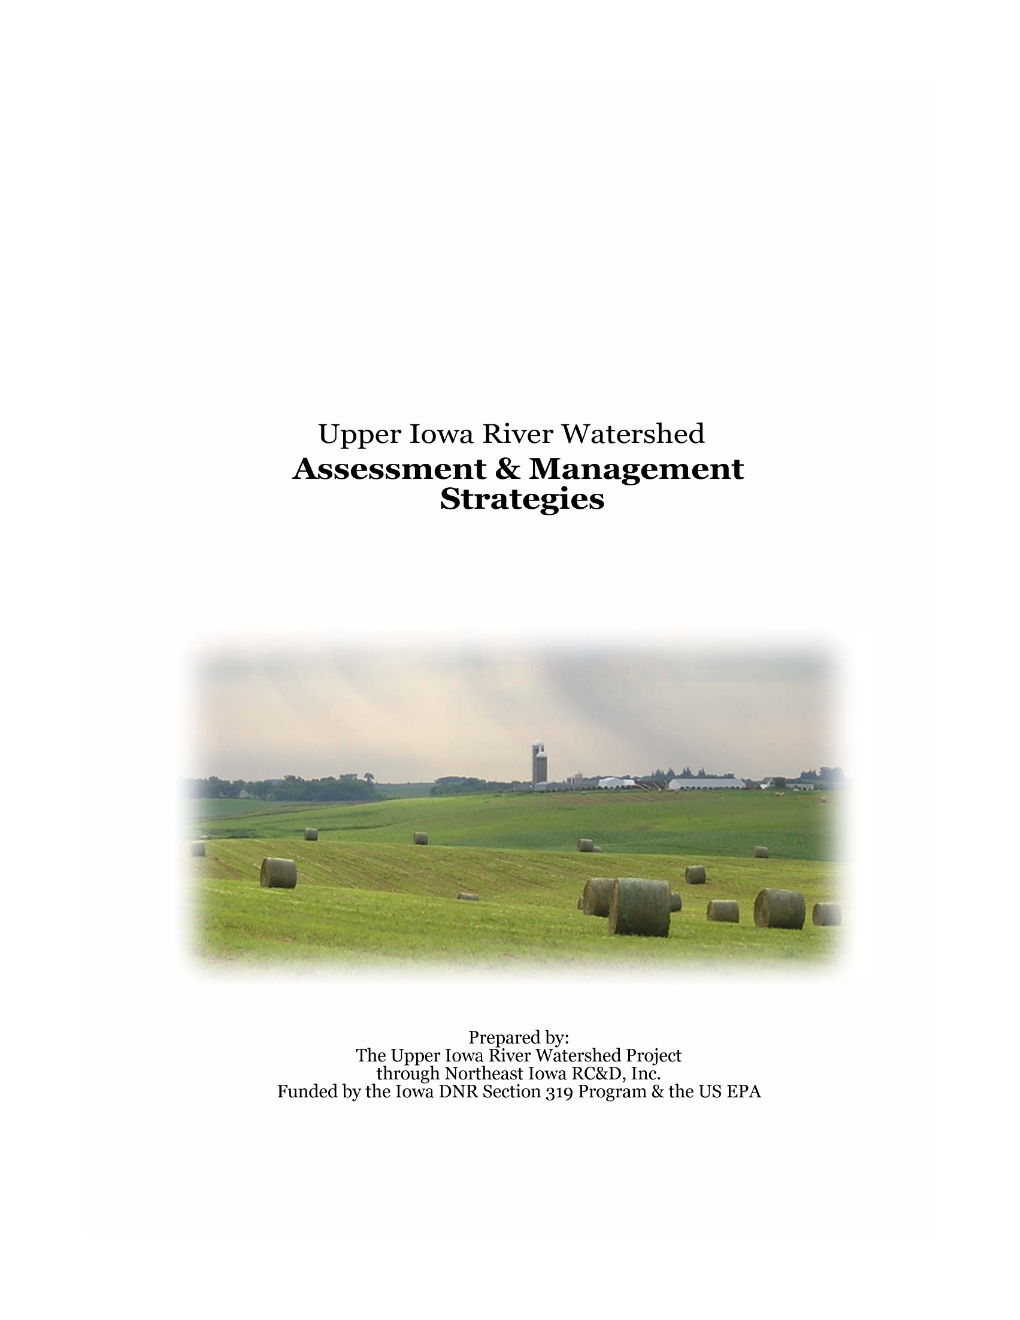 Upper Iowa River Watershed Assessment & Management